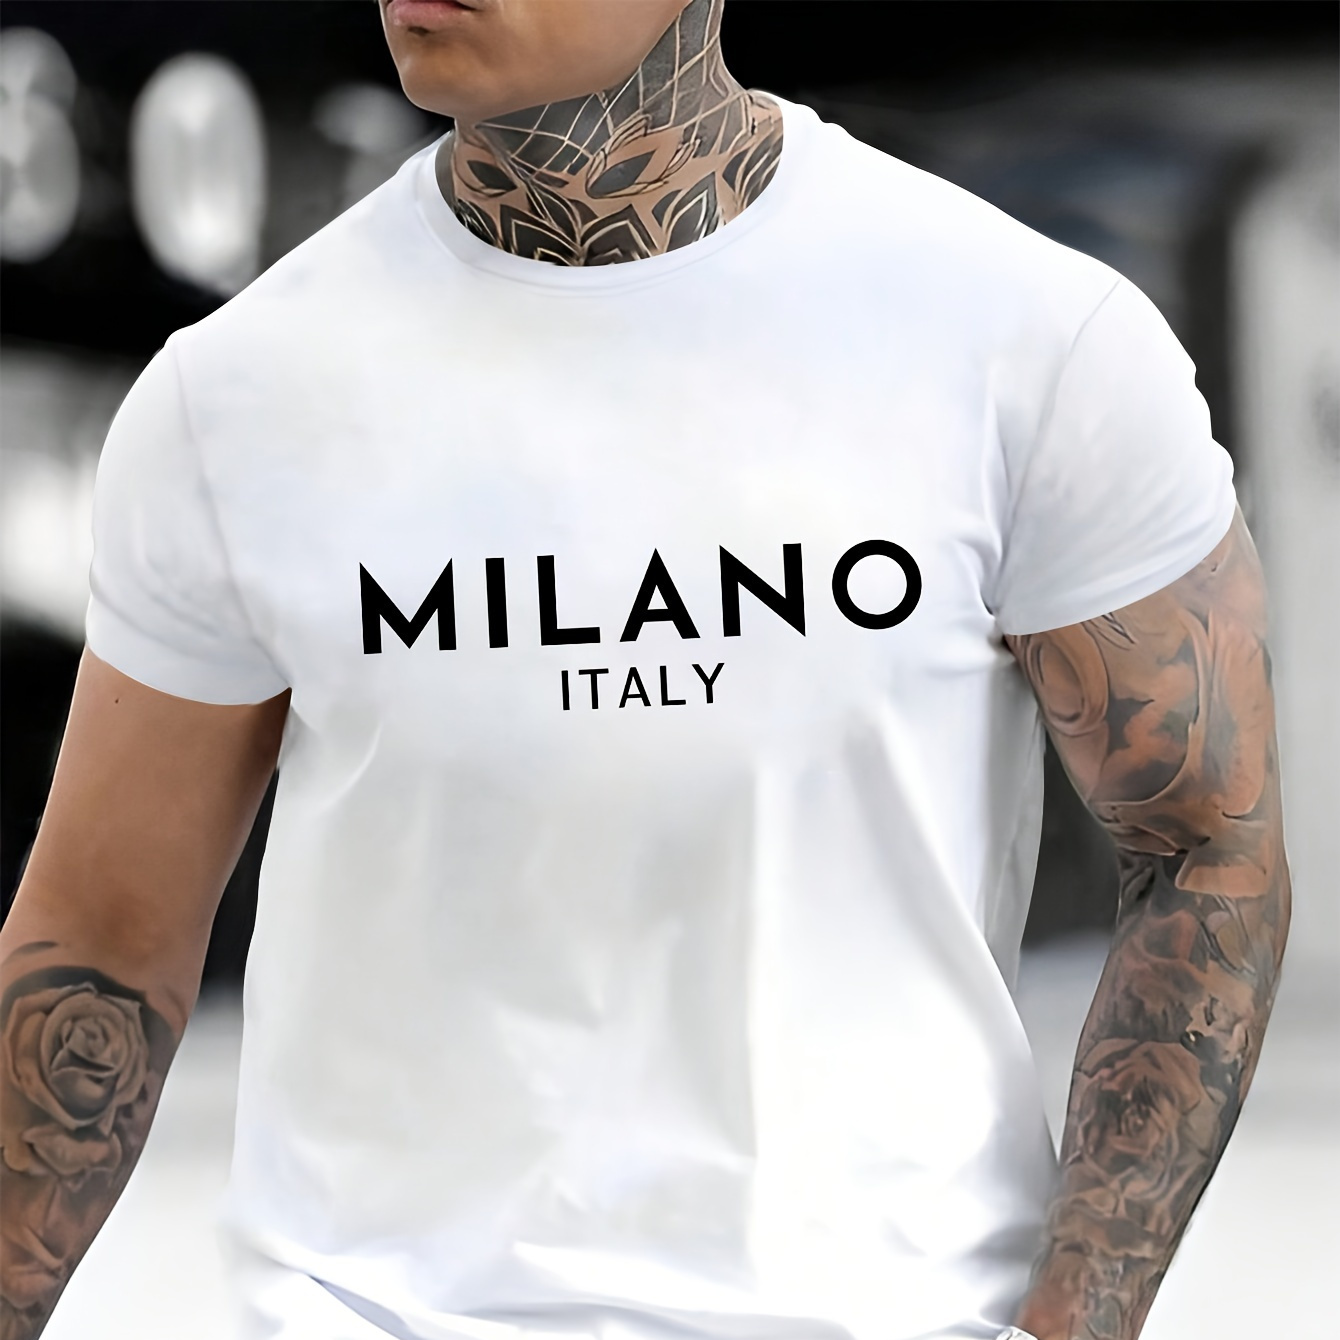 

Milano Italy Letter Print, Men's Round Neck Short Sleeve T-shirt, Casual Comfy Lightweight Top For Summer